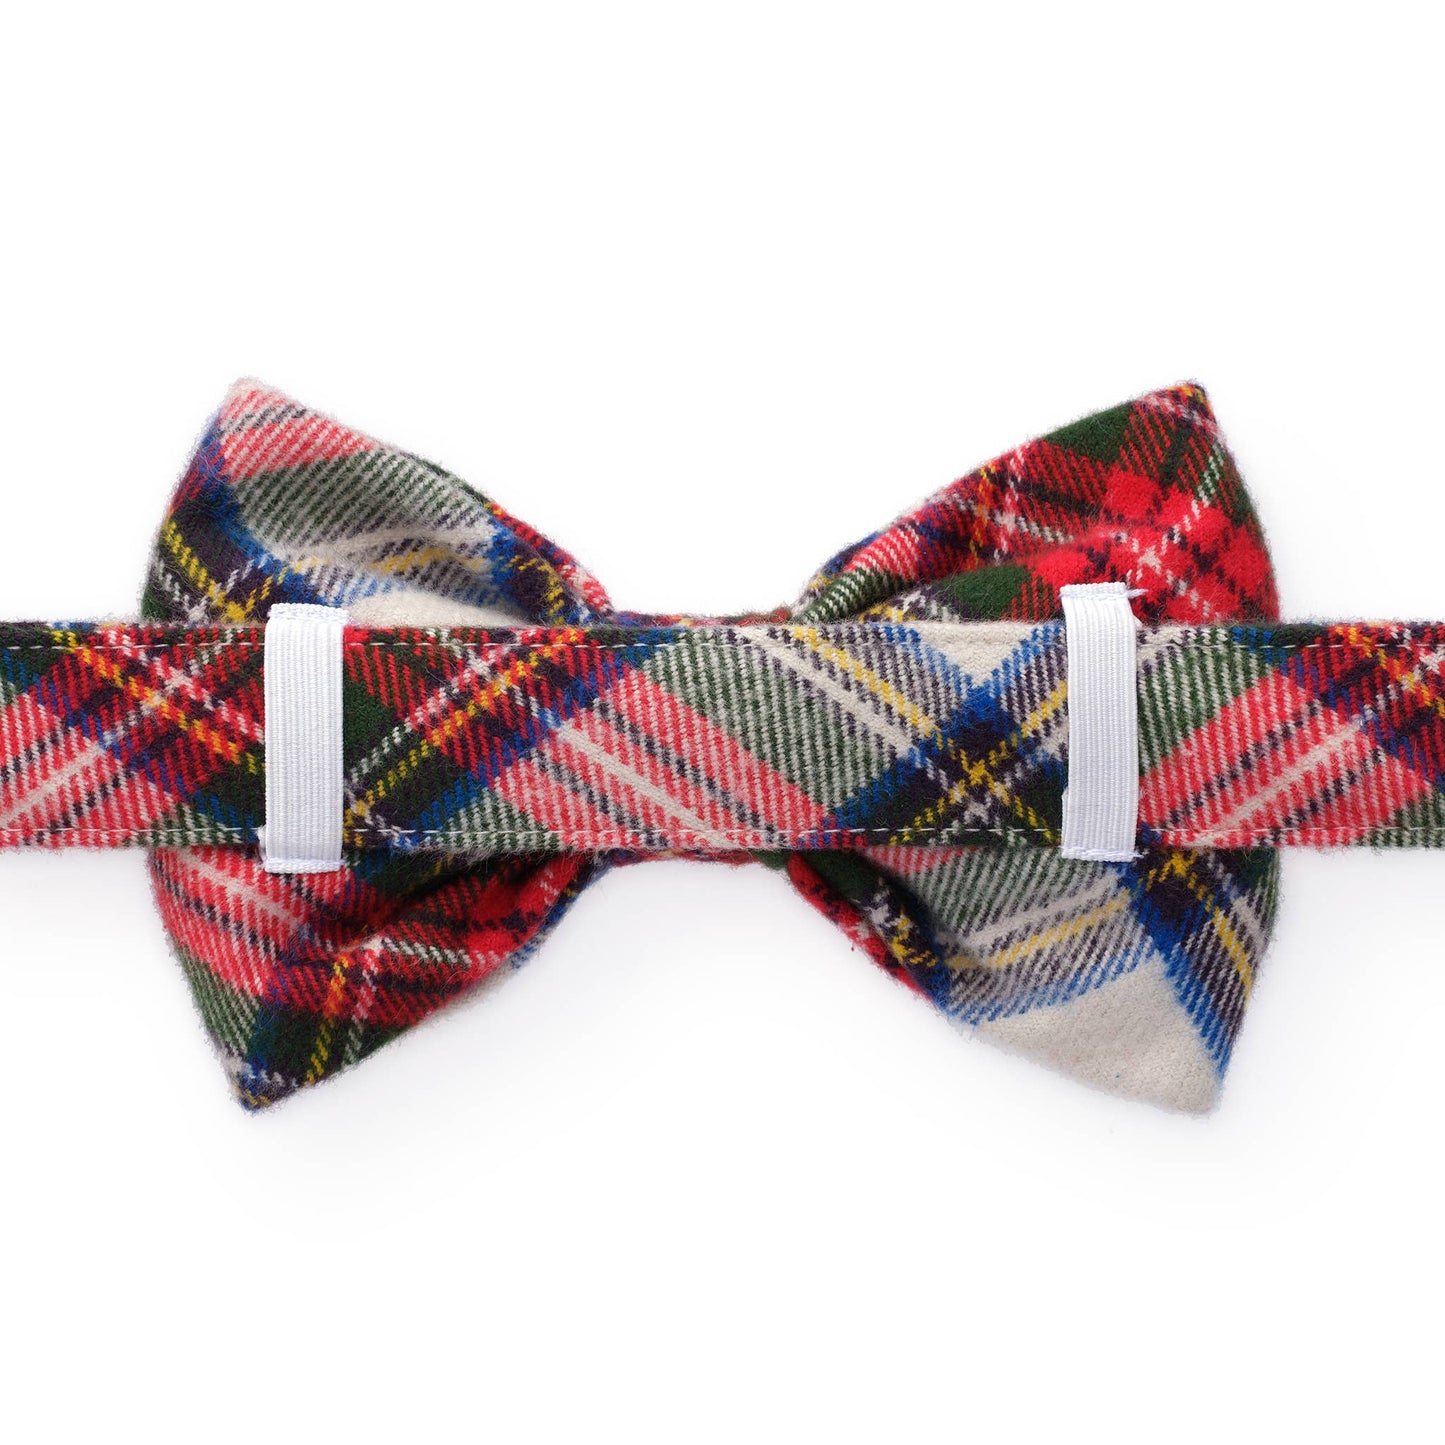 Regent Plaid Flannel Holiday Dog Bow Tie: Large